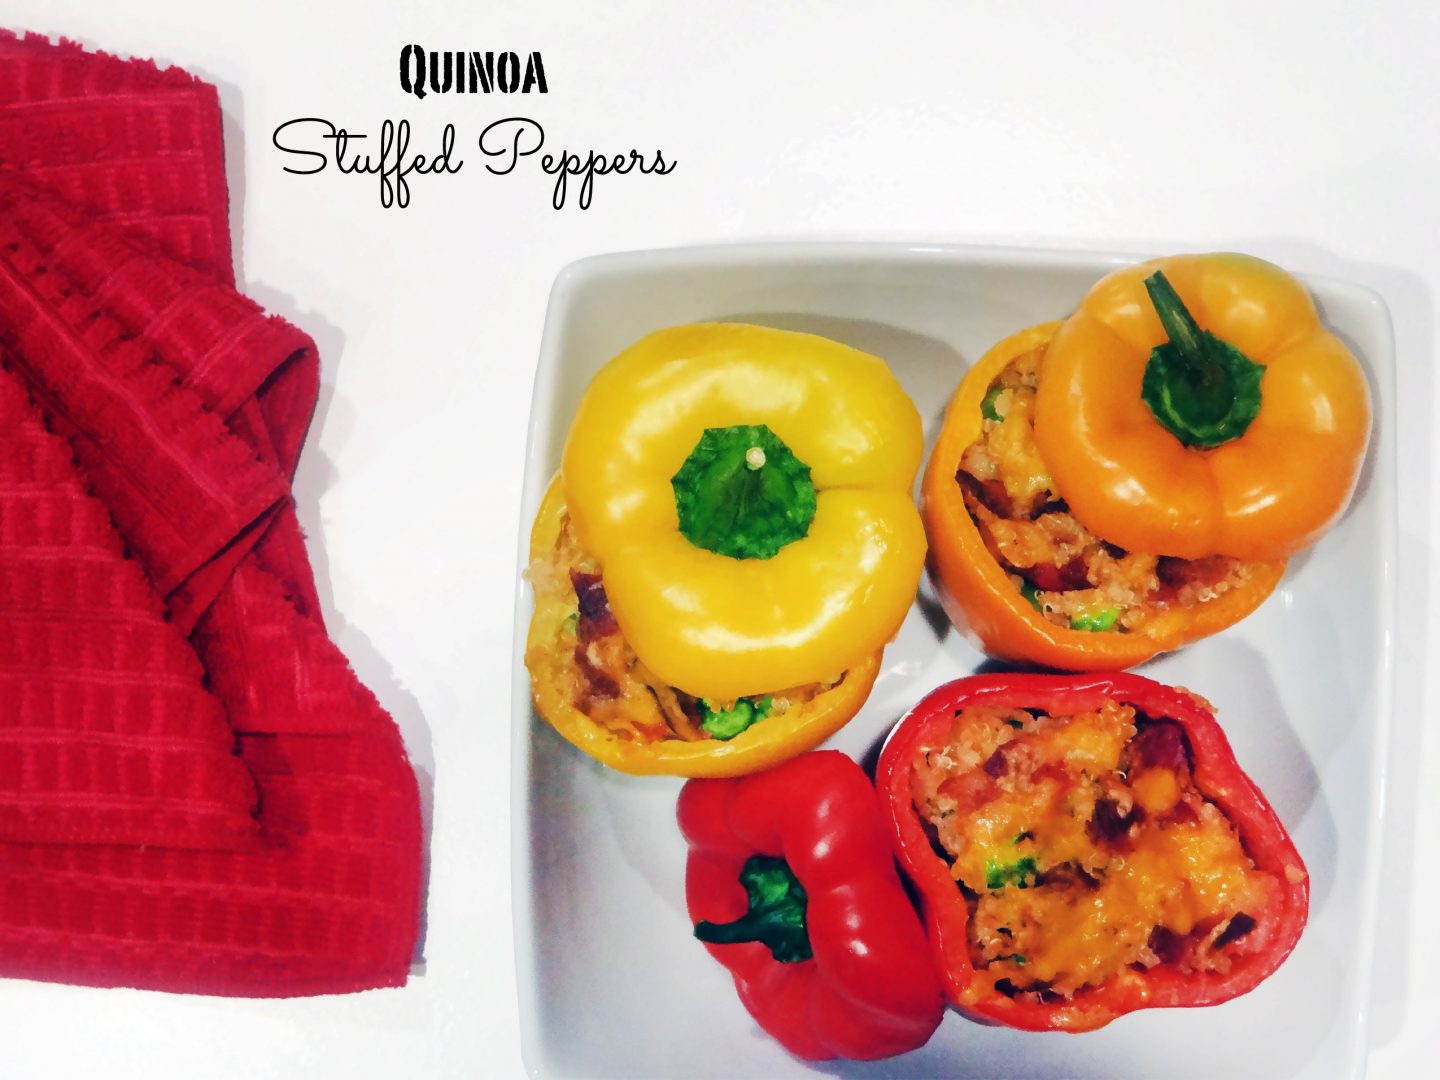 Lifestyle Blogger, Healthy Dinner, Quinoa, Quinoa Recipes, Healthy Recipes, Stuffed Peppers, Lifestyle Blog,